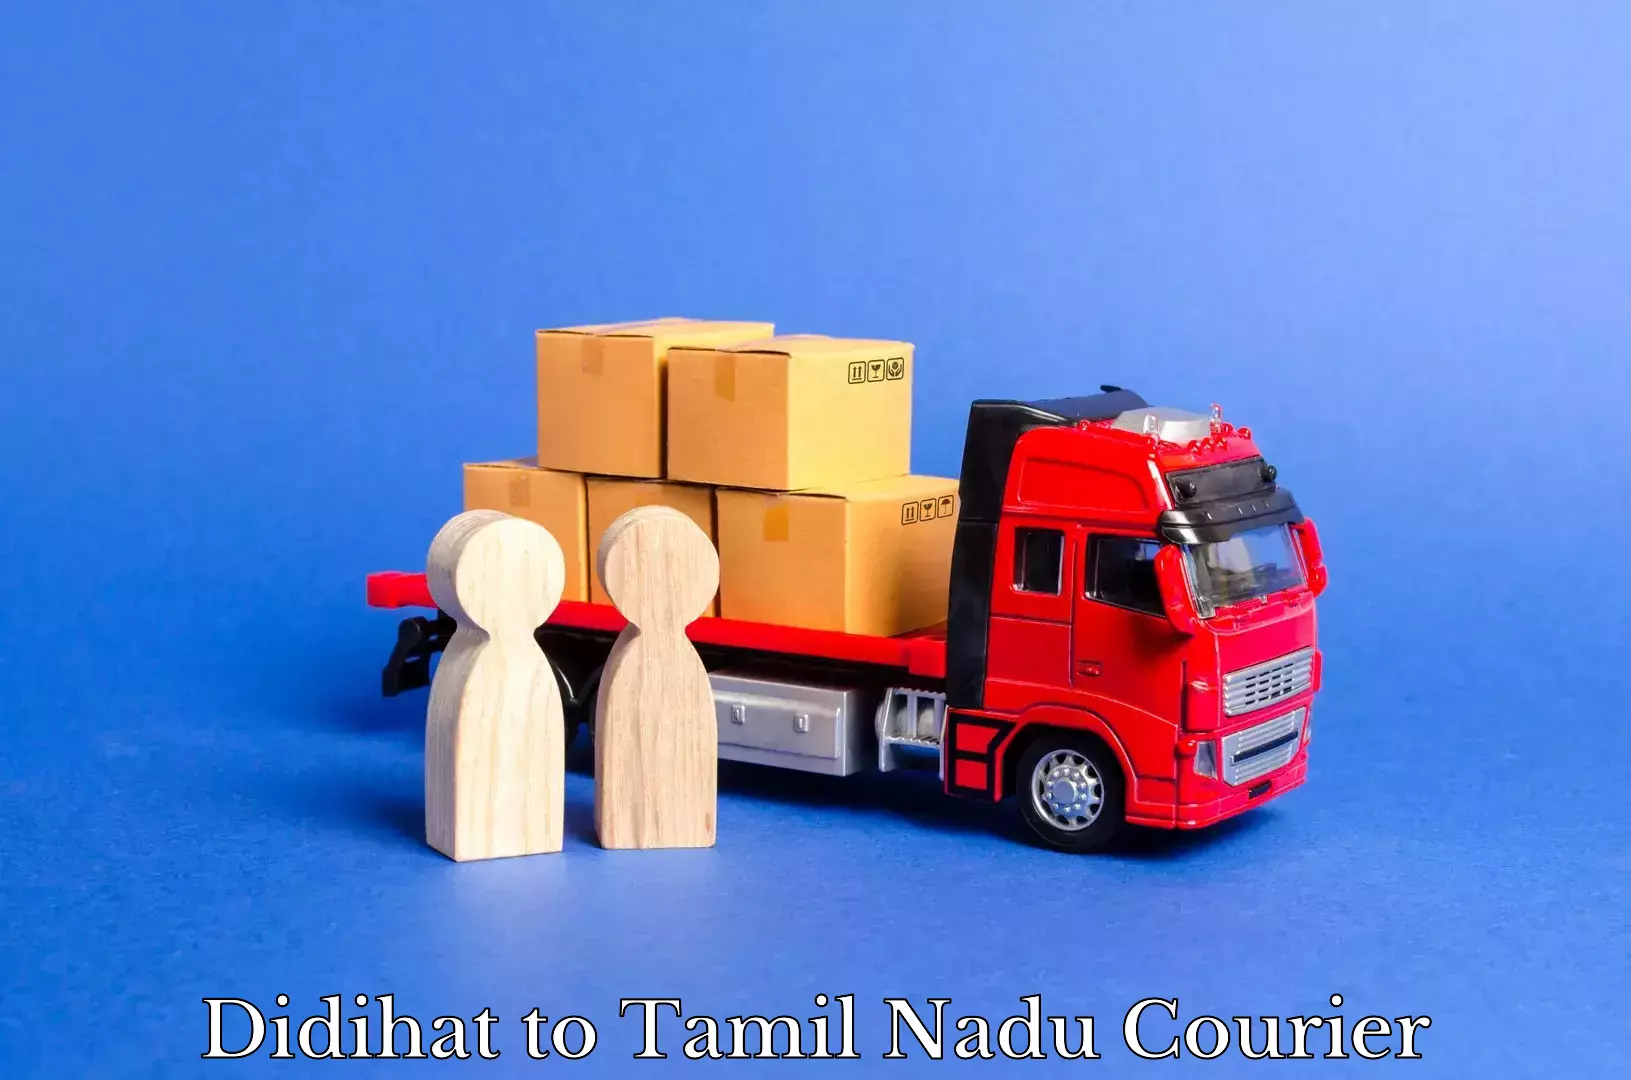 Personal courier services in Didihat to Tamil Nadu